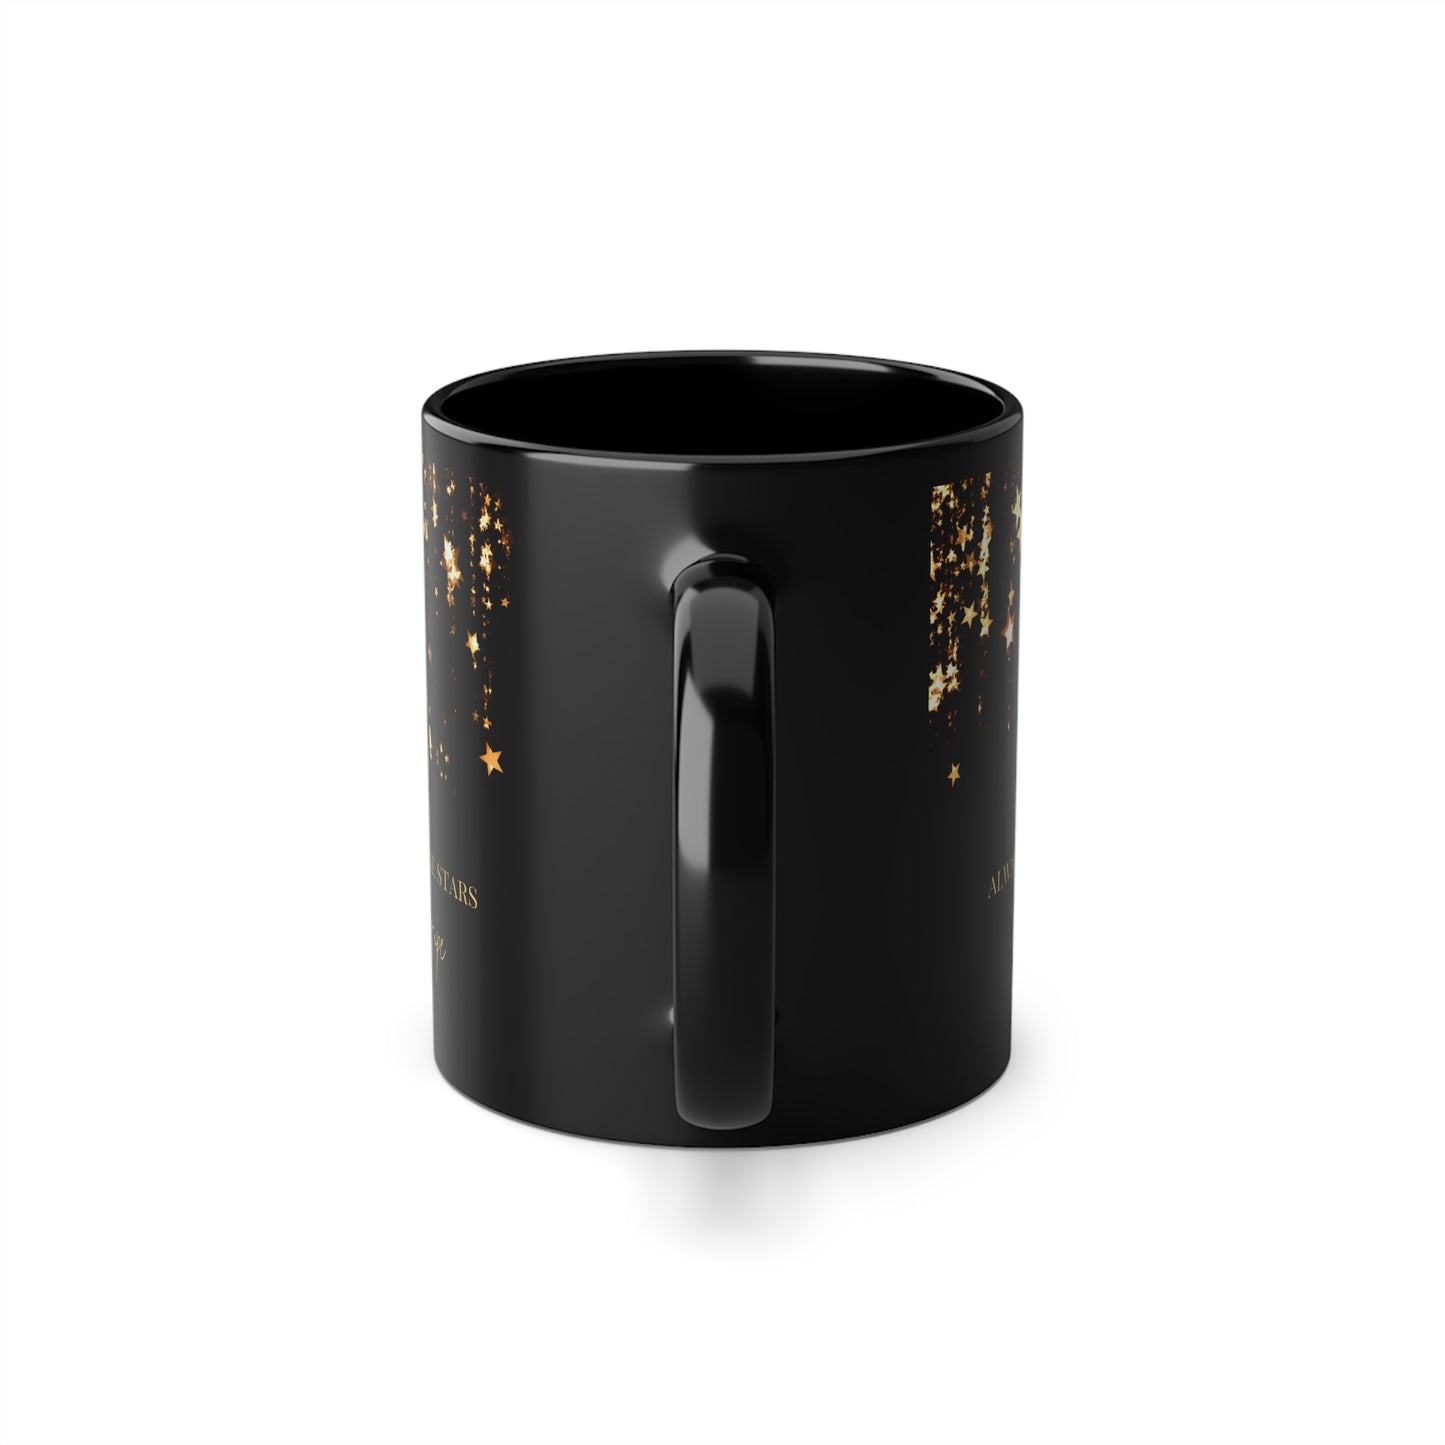 Reach for the stars Black Coffee Cup, 11oz